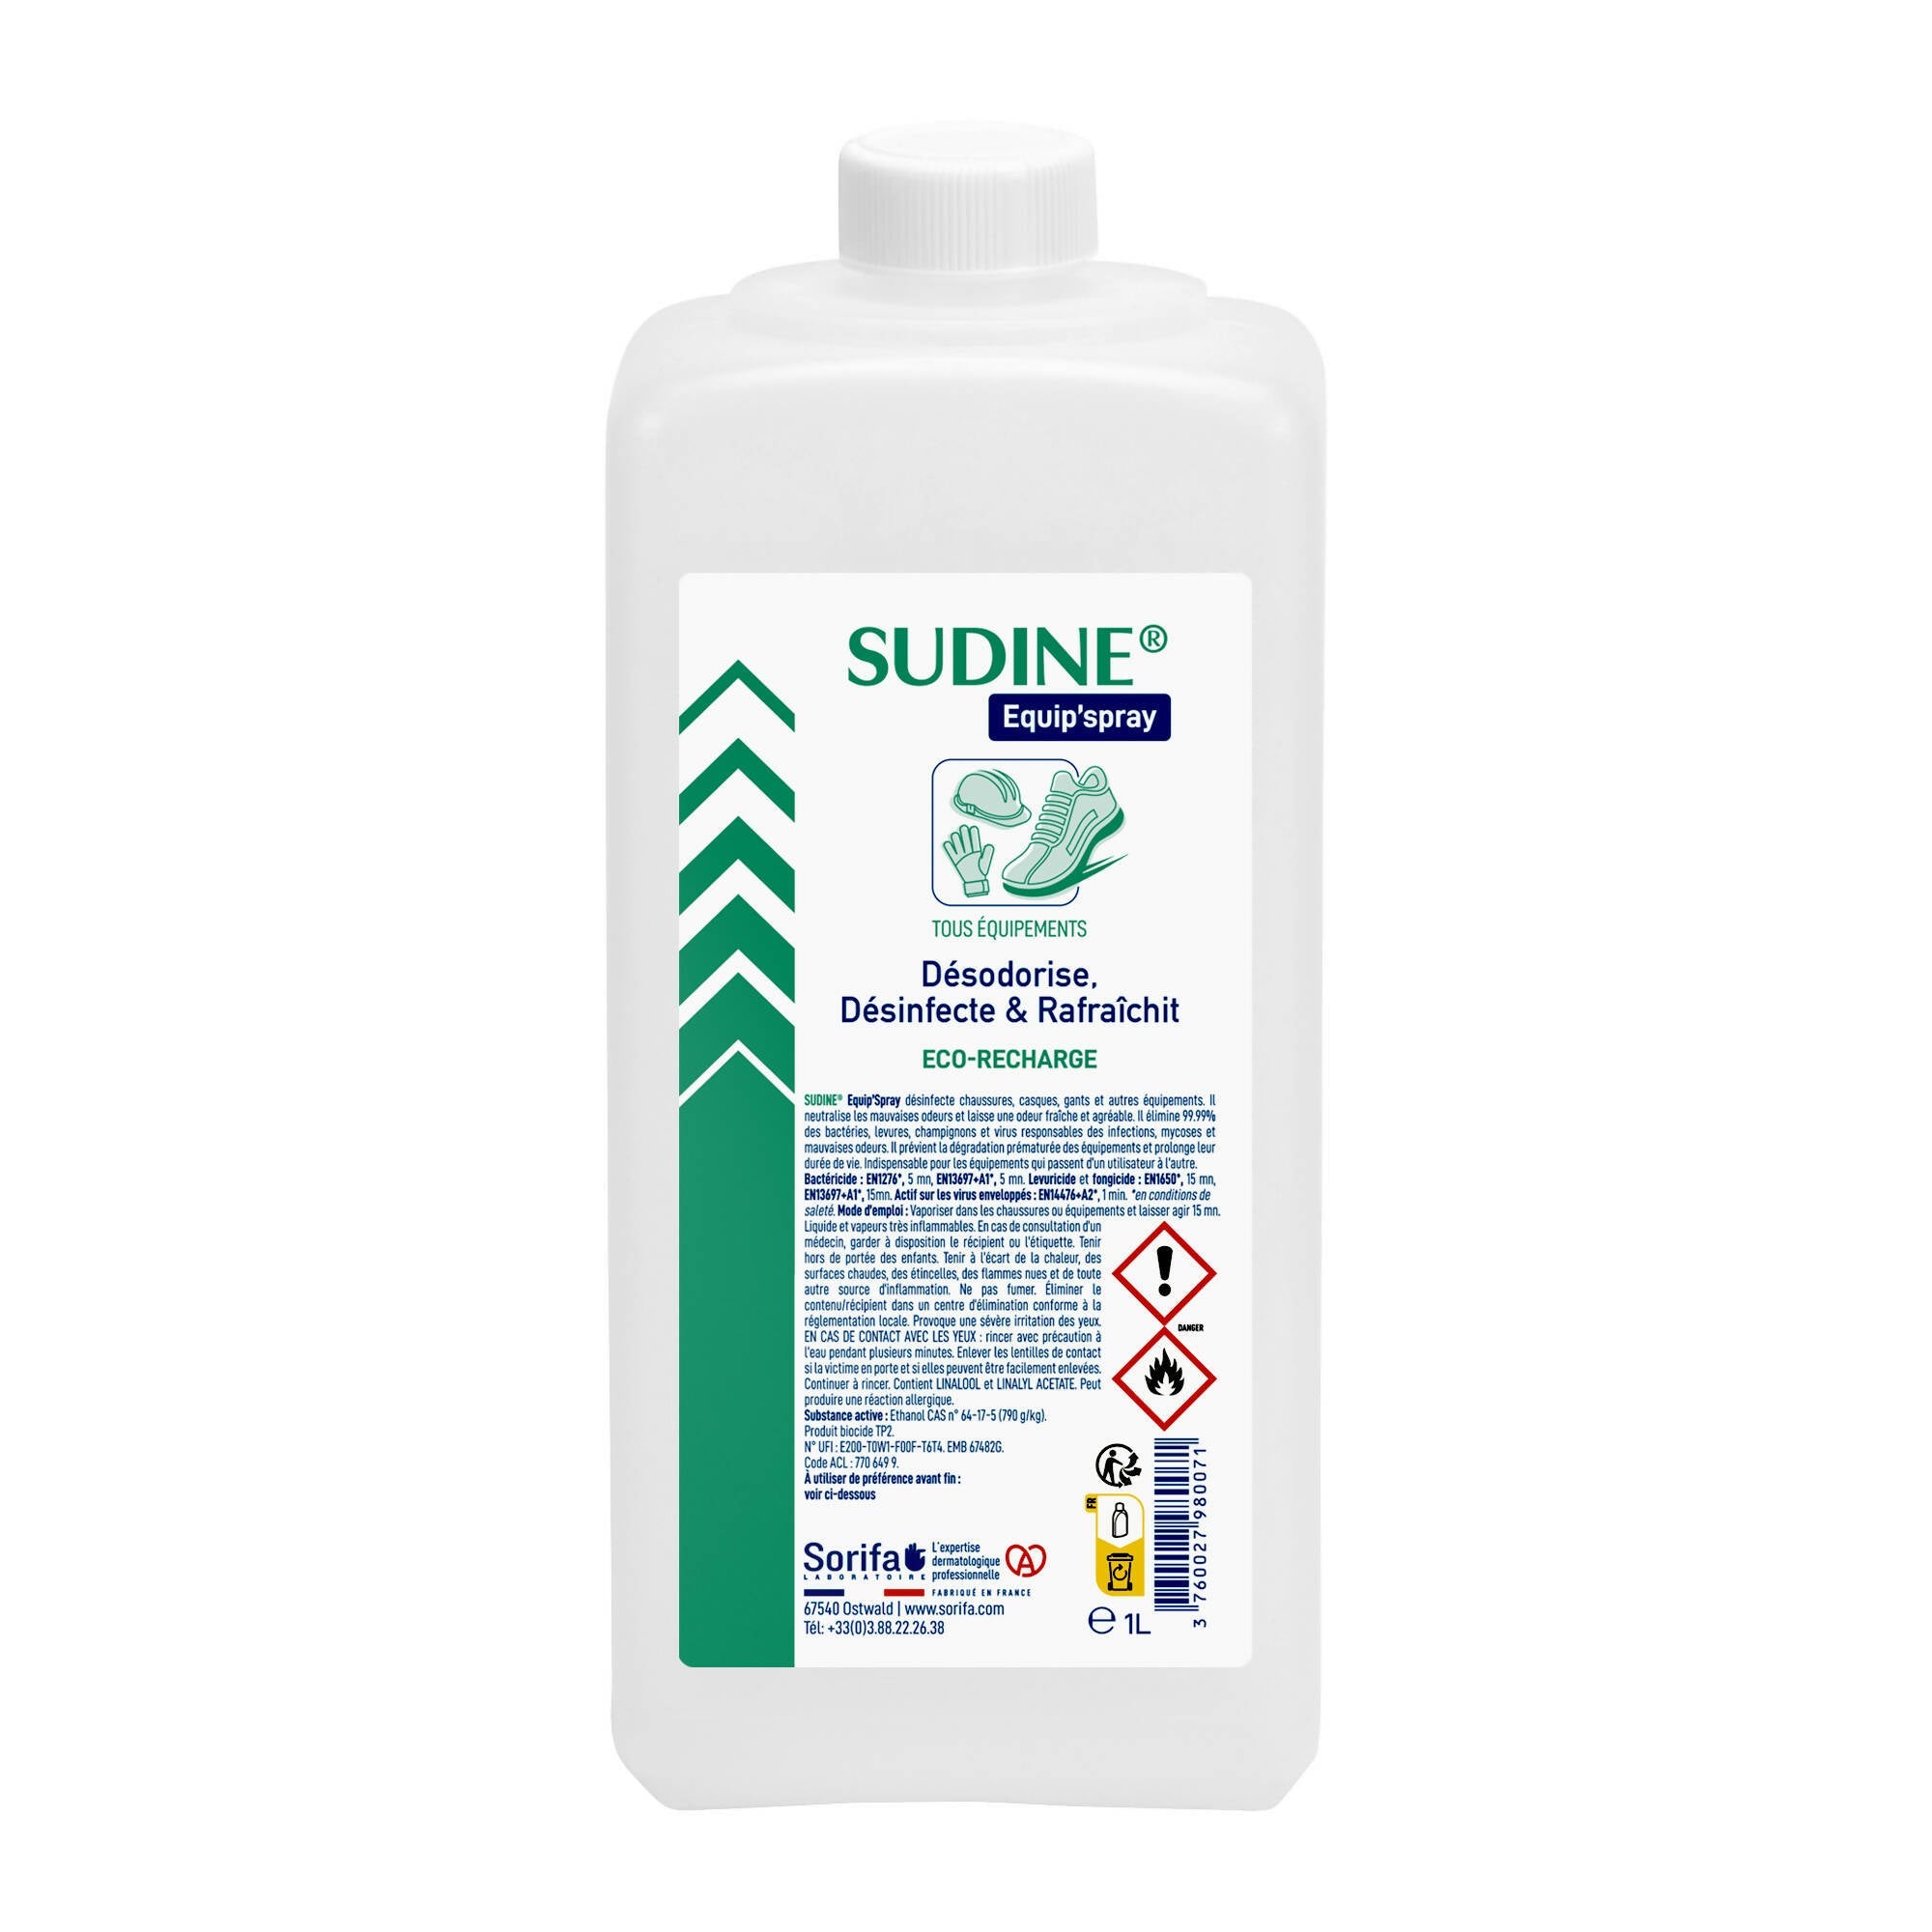 SORIFA - Set of 2 - Sudine Equip'spray - Deodorizes, disinfects, refreshes - Shoes, helmets, gloves, equipment - 1L refill for SUDINE Equip'spray 50 and 125 ml or for the 1L SORIFA Spray